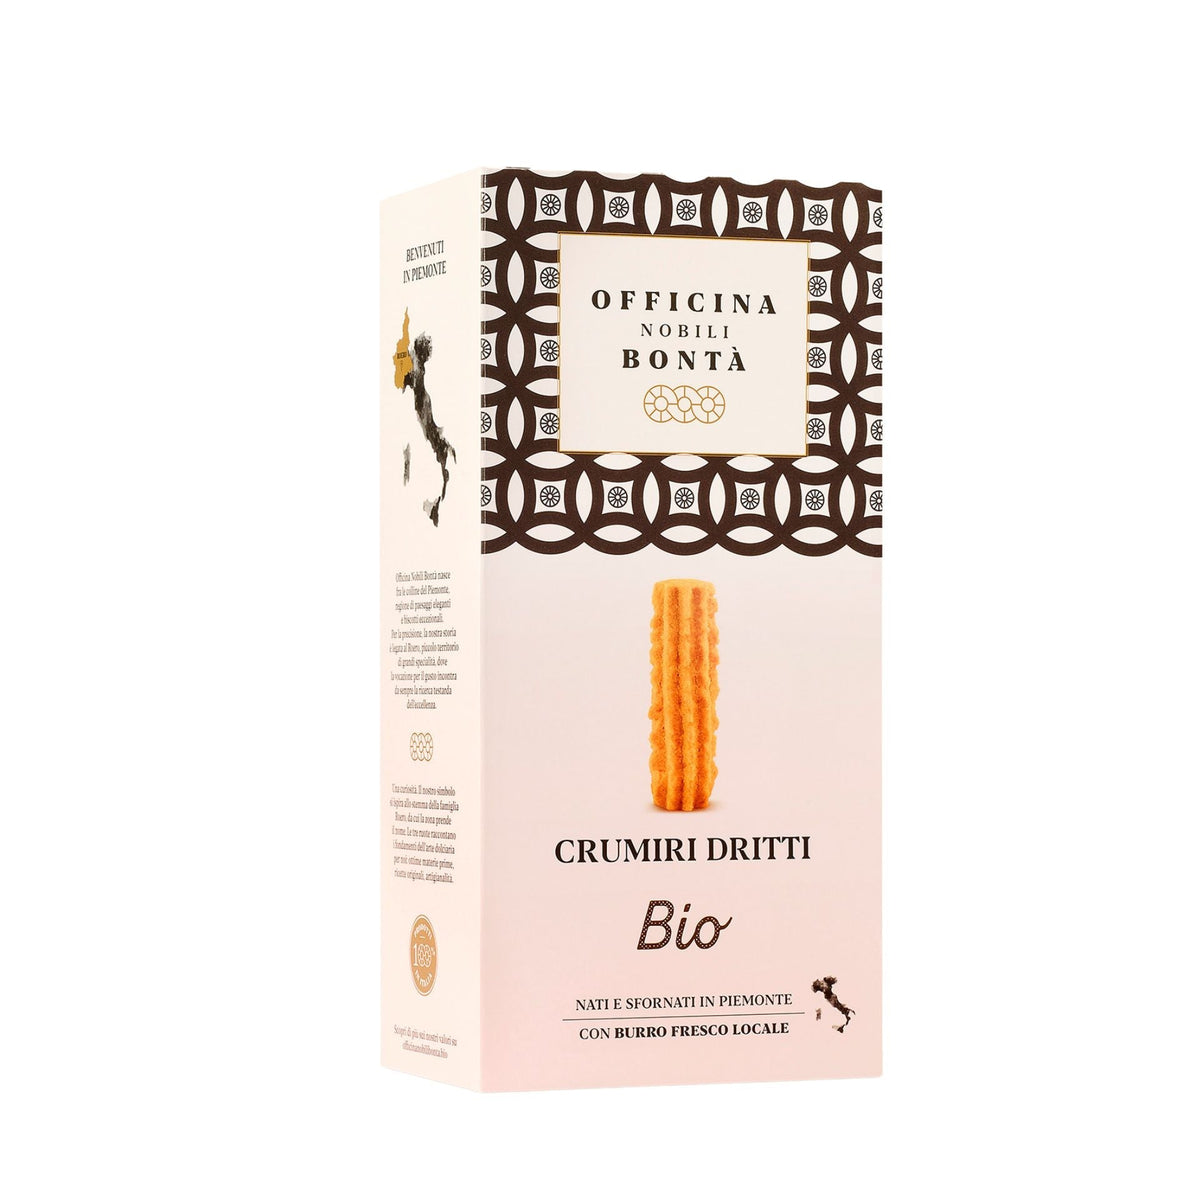 Officina Nobili Bonta Organic Crumiri Biscuits 140g (Box)  | Imported and distributed in the UK by Just Gourmet Foods